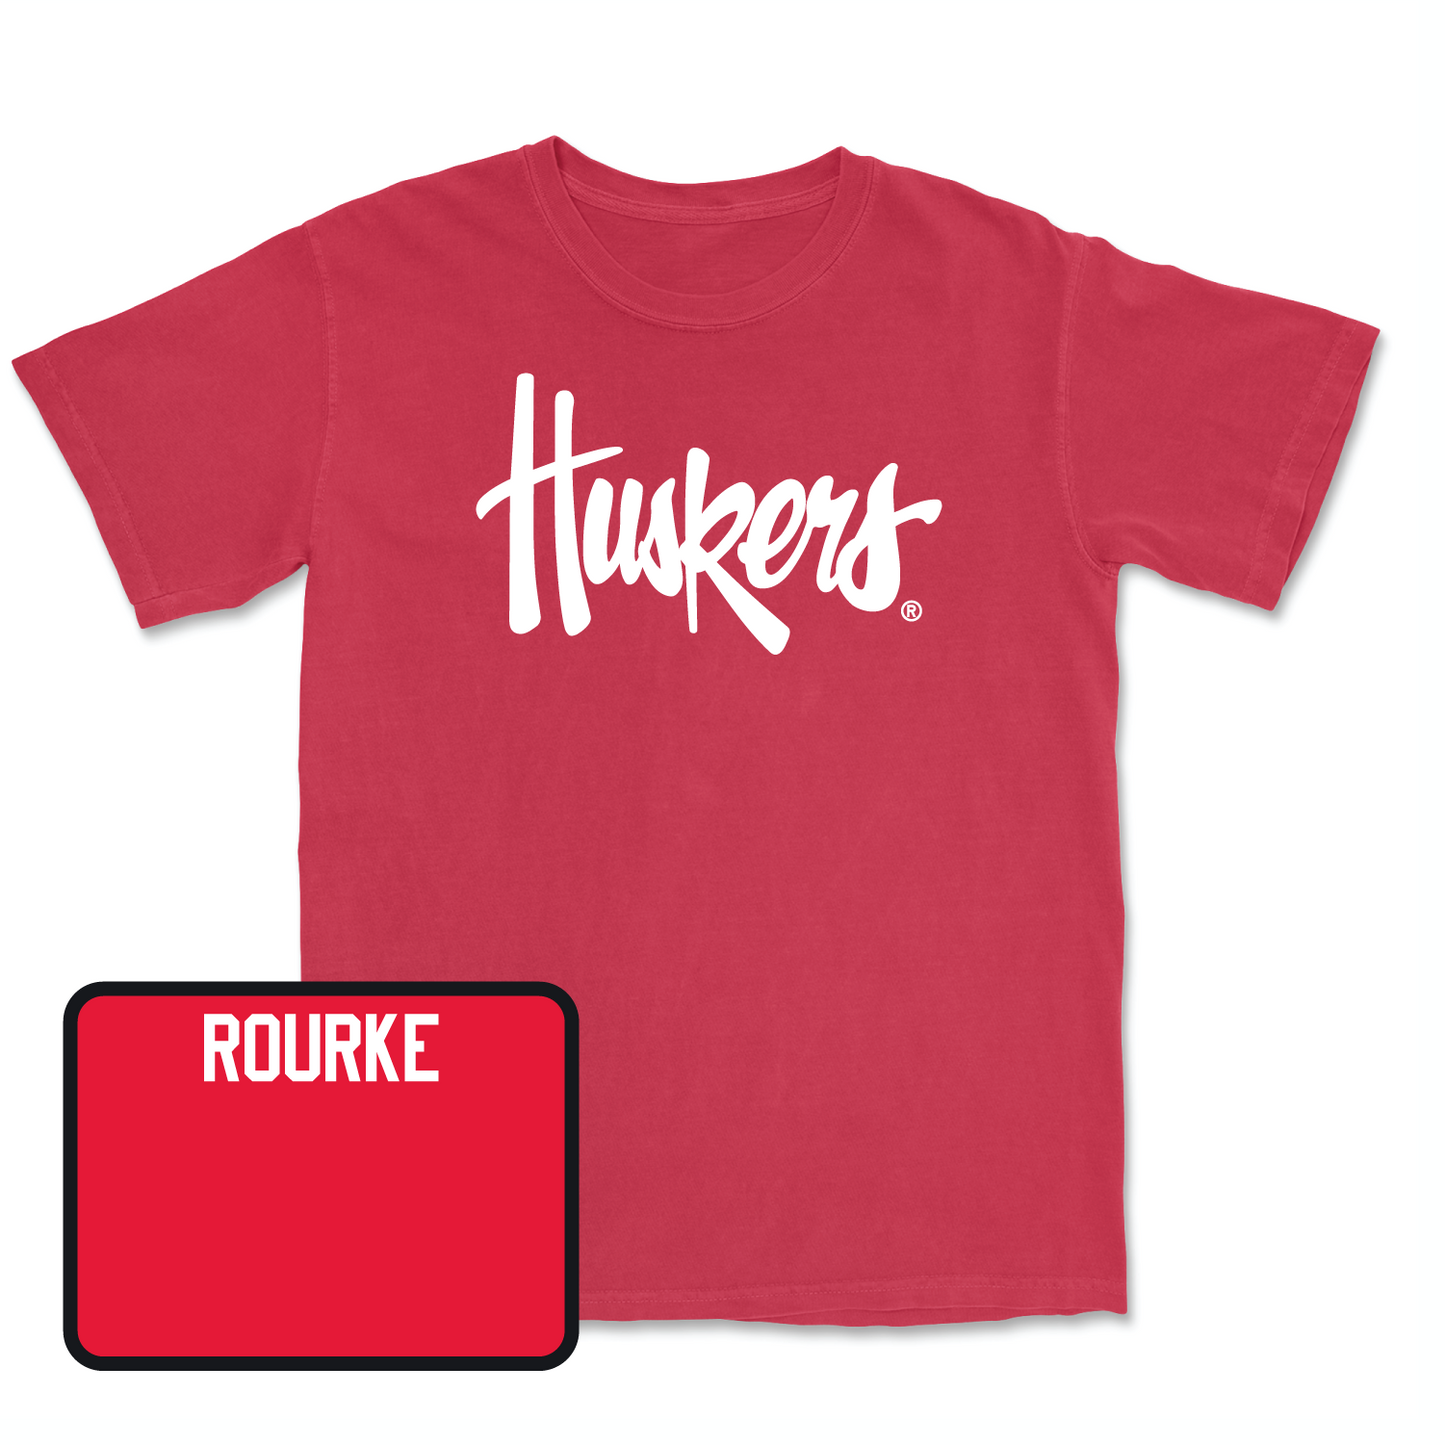 Red Women's Gymnastics Huskers Tee Youth Large / Halle Rourke